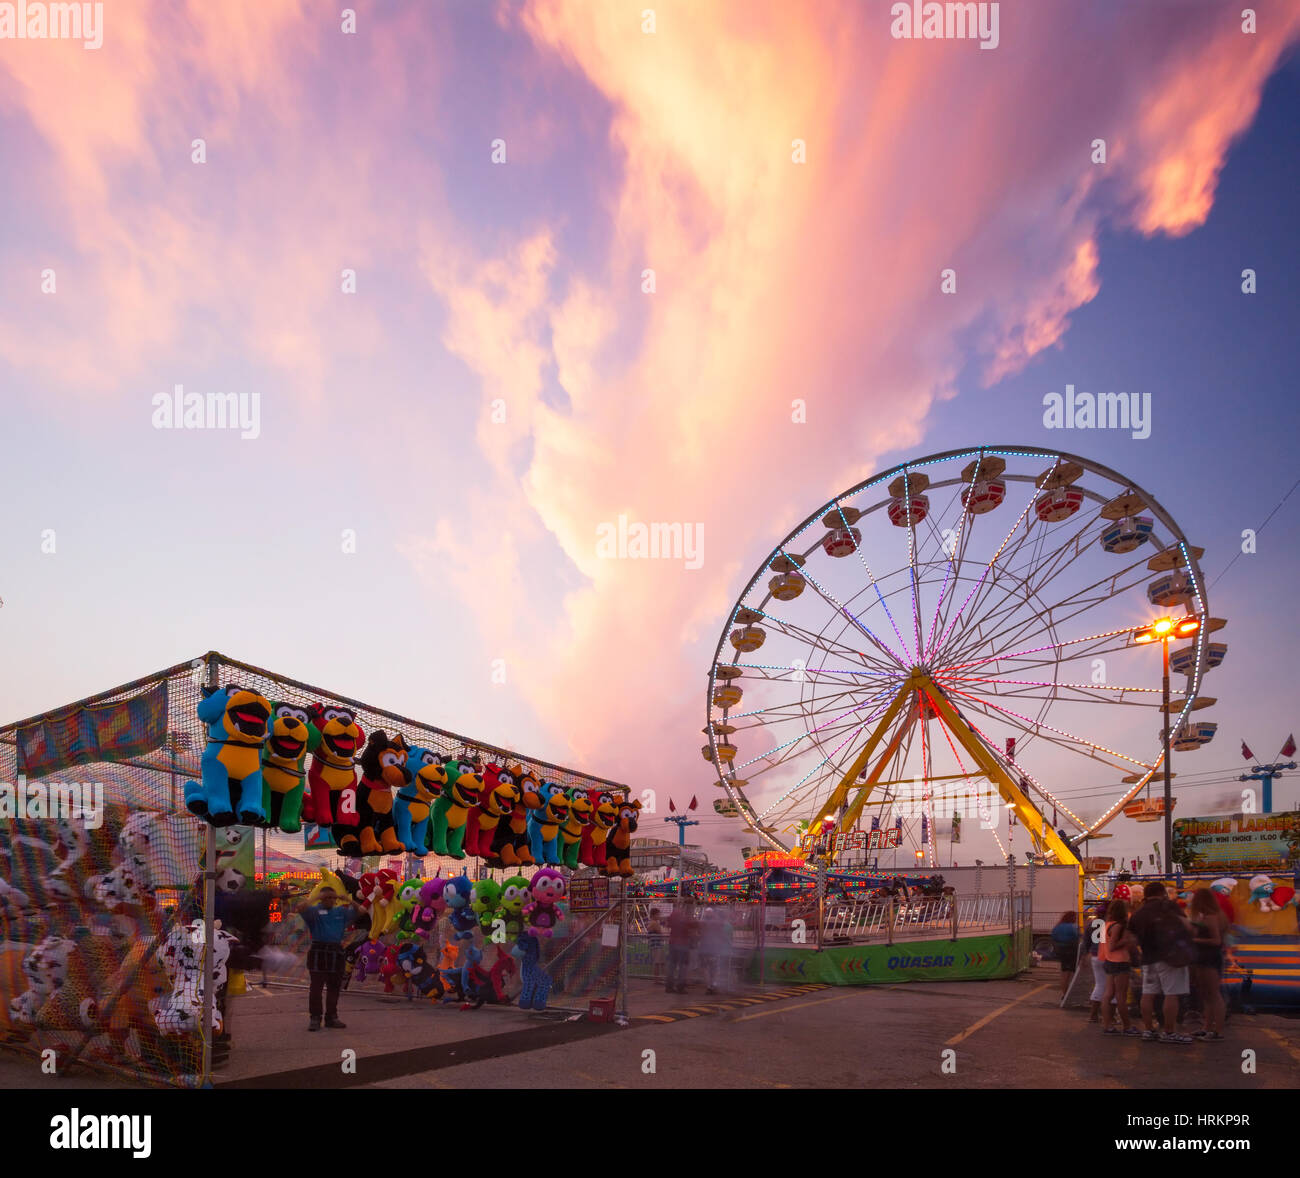 A carnival game and rides at sunset at the annual Toronto CNE (Canadian National Exhibition) in Toronto, Ontario, Canada. Stock Photo